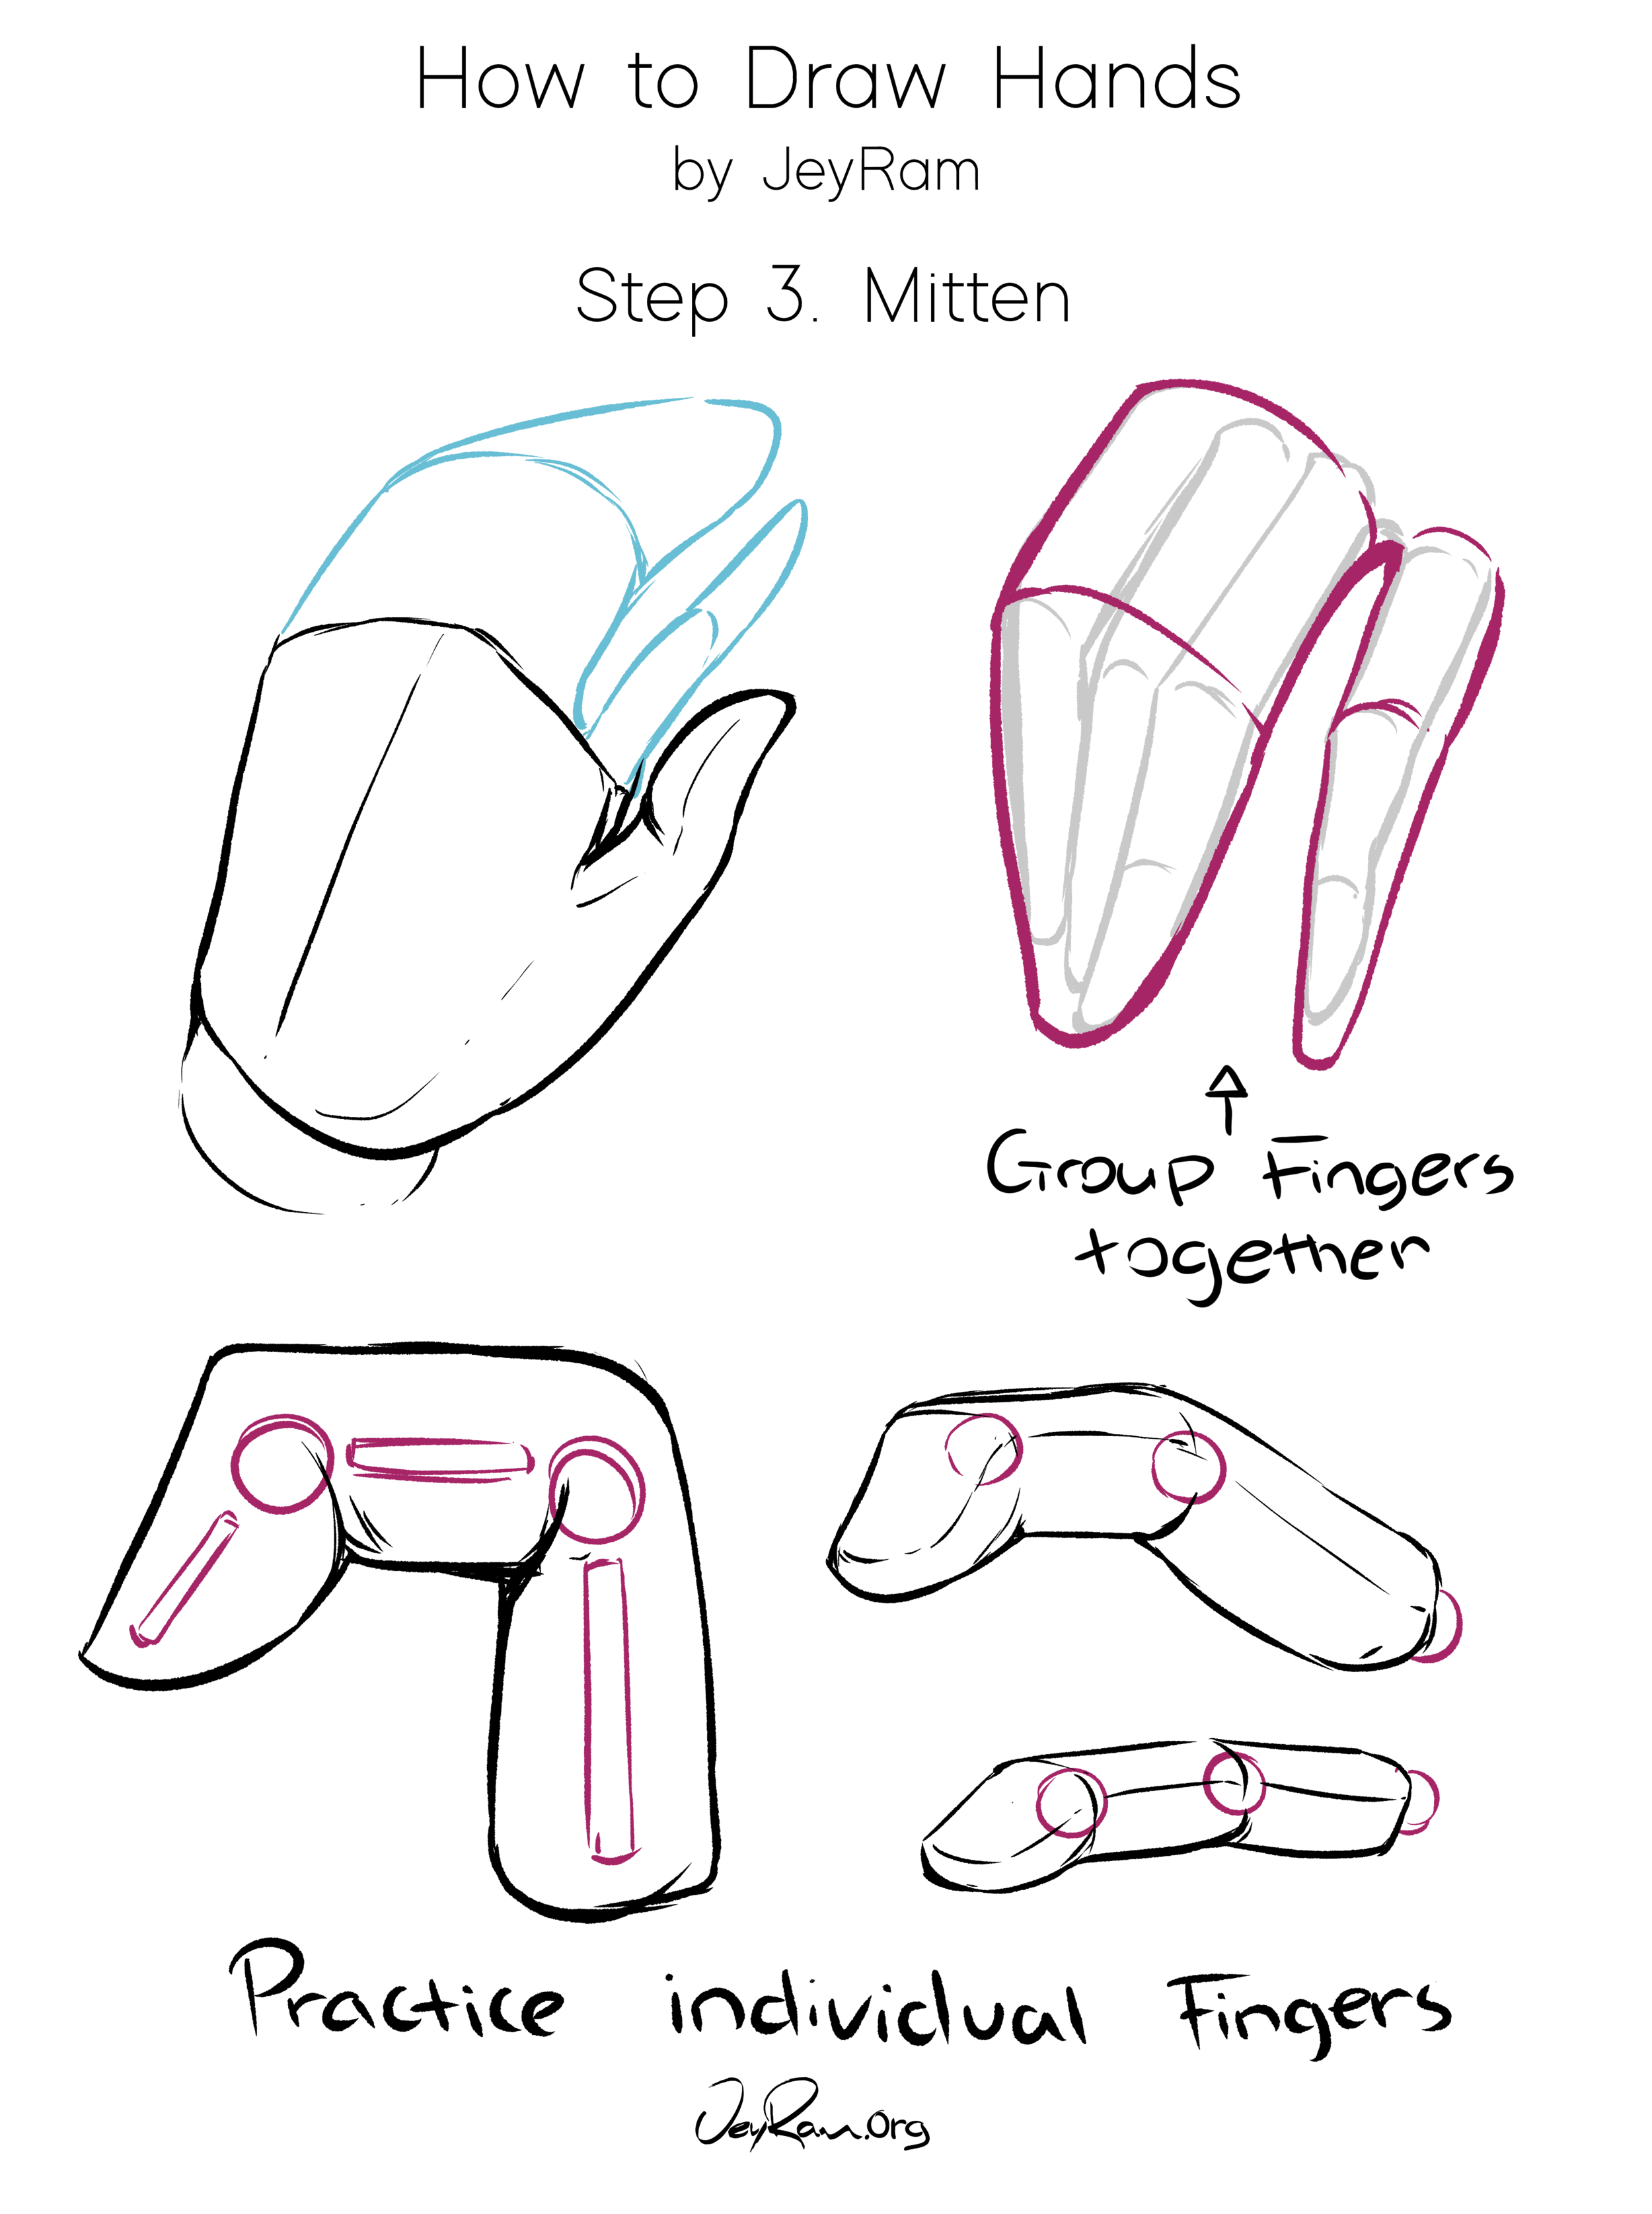 How to Draw Hands: Step by Step Tutorial for Beginners - JeyRam